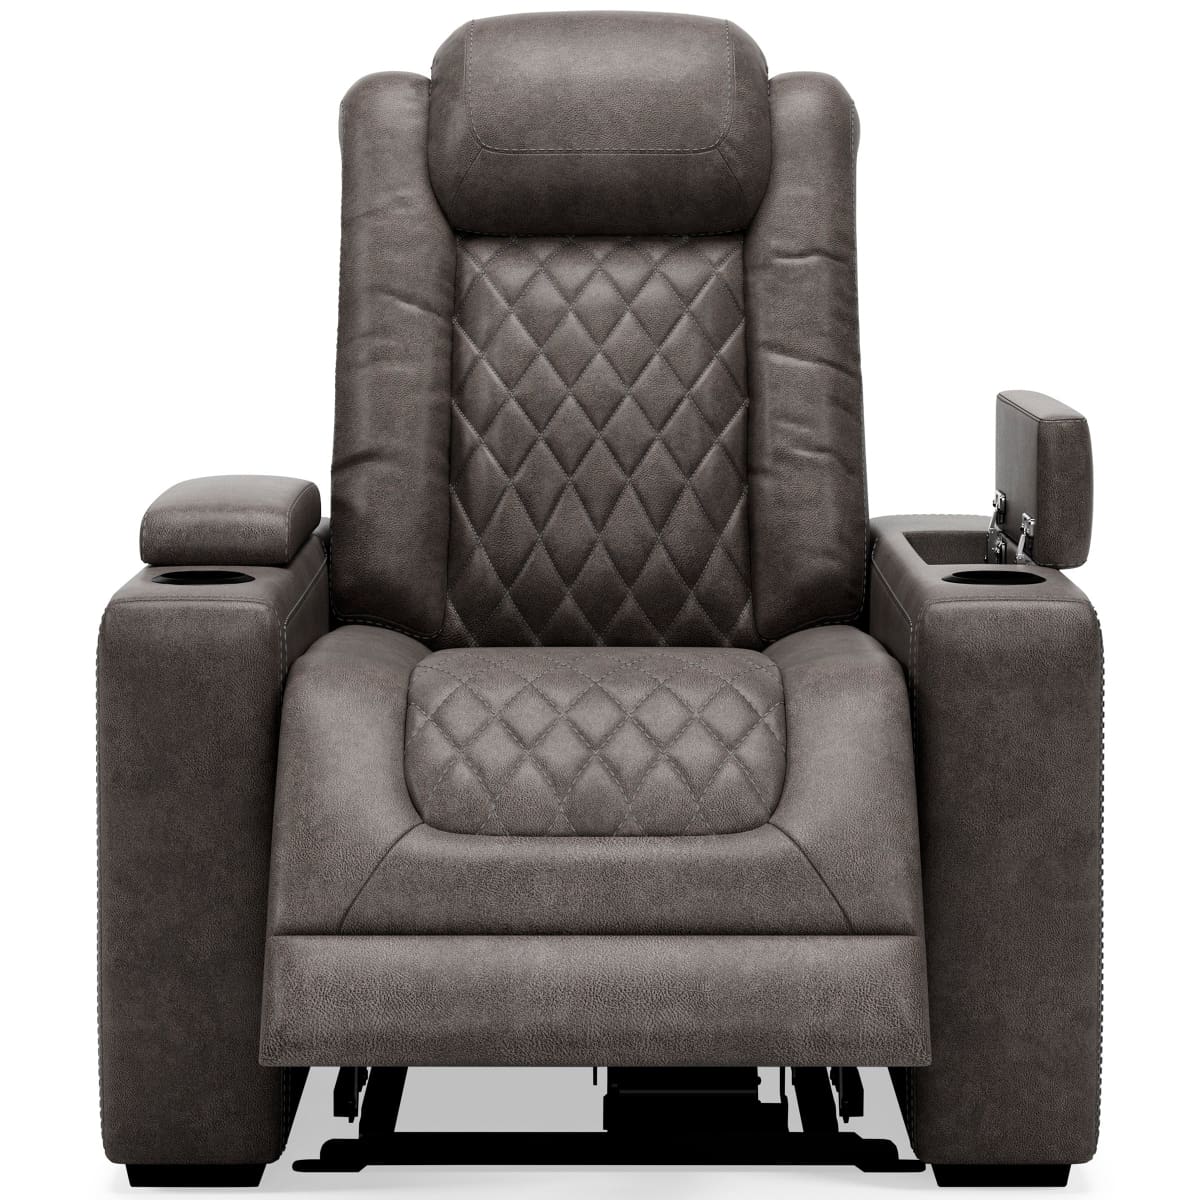 HyllMon tPower Recliner - accent-chairs